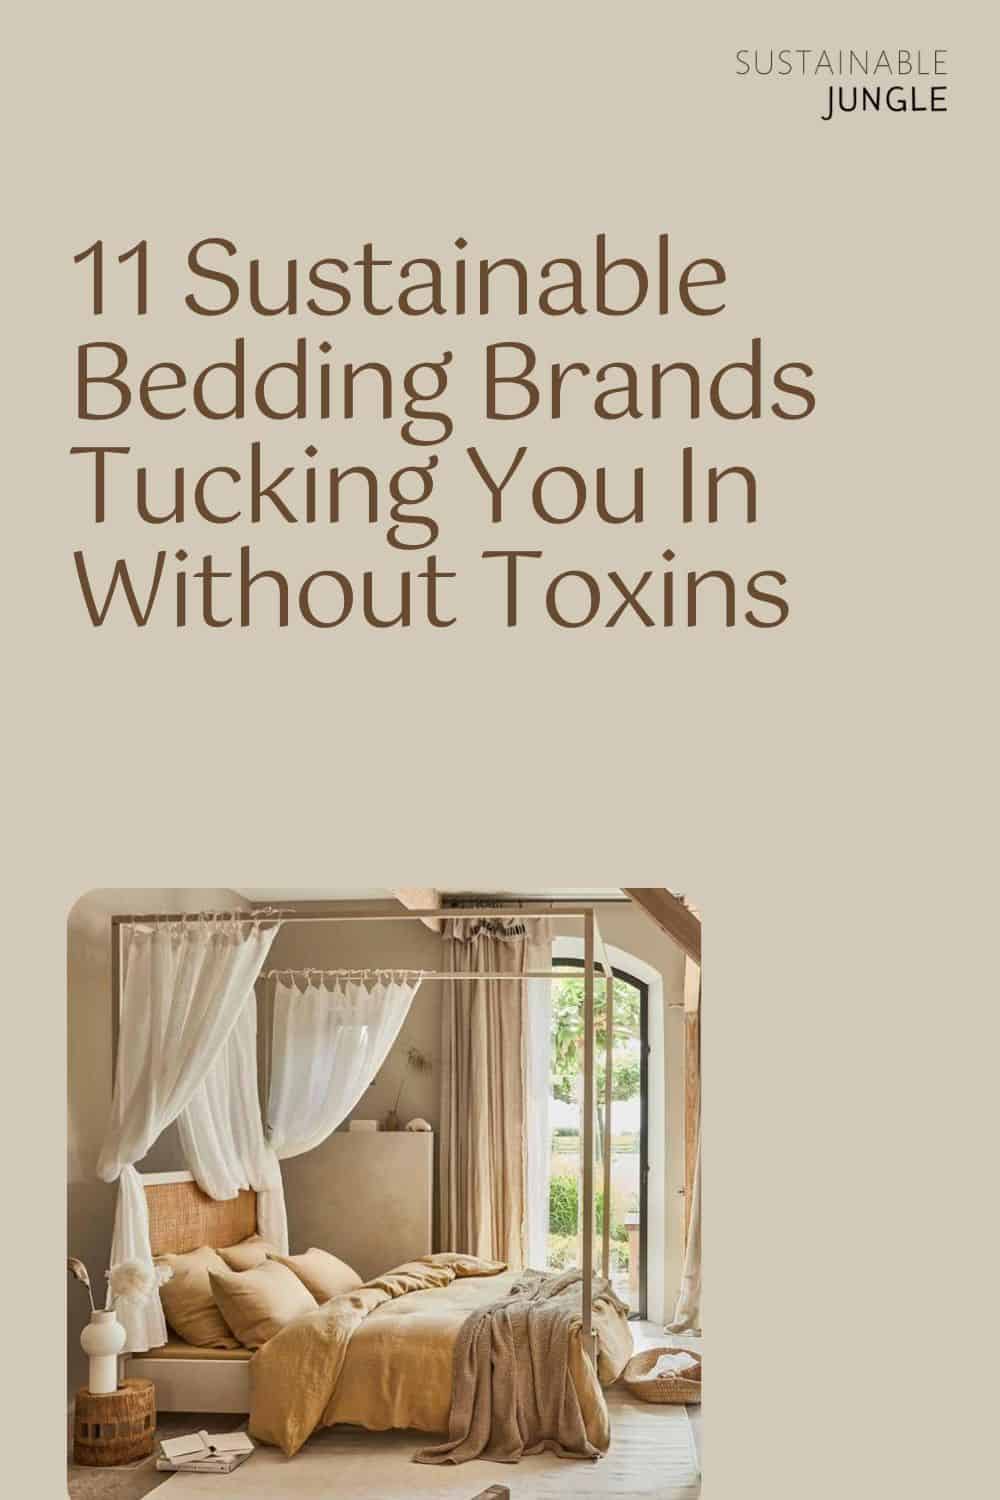 11 Sustainable Bedding Brands Tucking You In Without Toxins Image by MagicLinen #sustainablebedding #affordablesustainablebedding #sustainablesheets #ecofriendlybedding #ecofriendlysheets #sustainablejungle